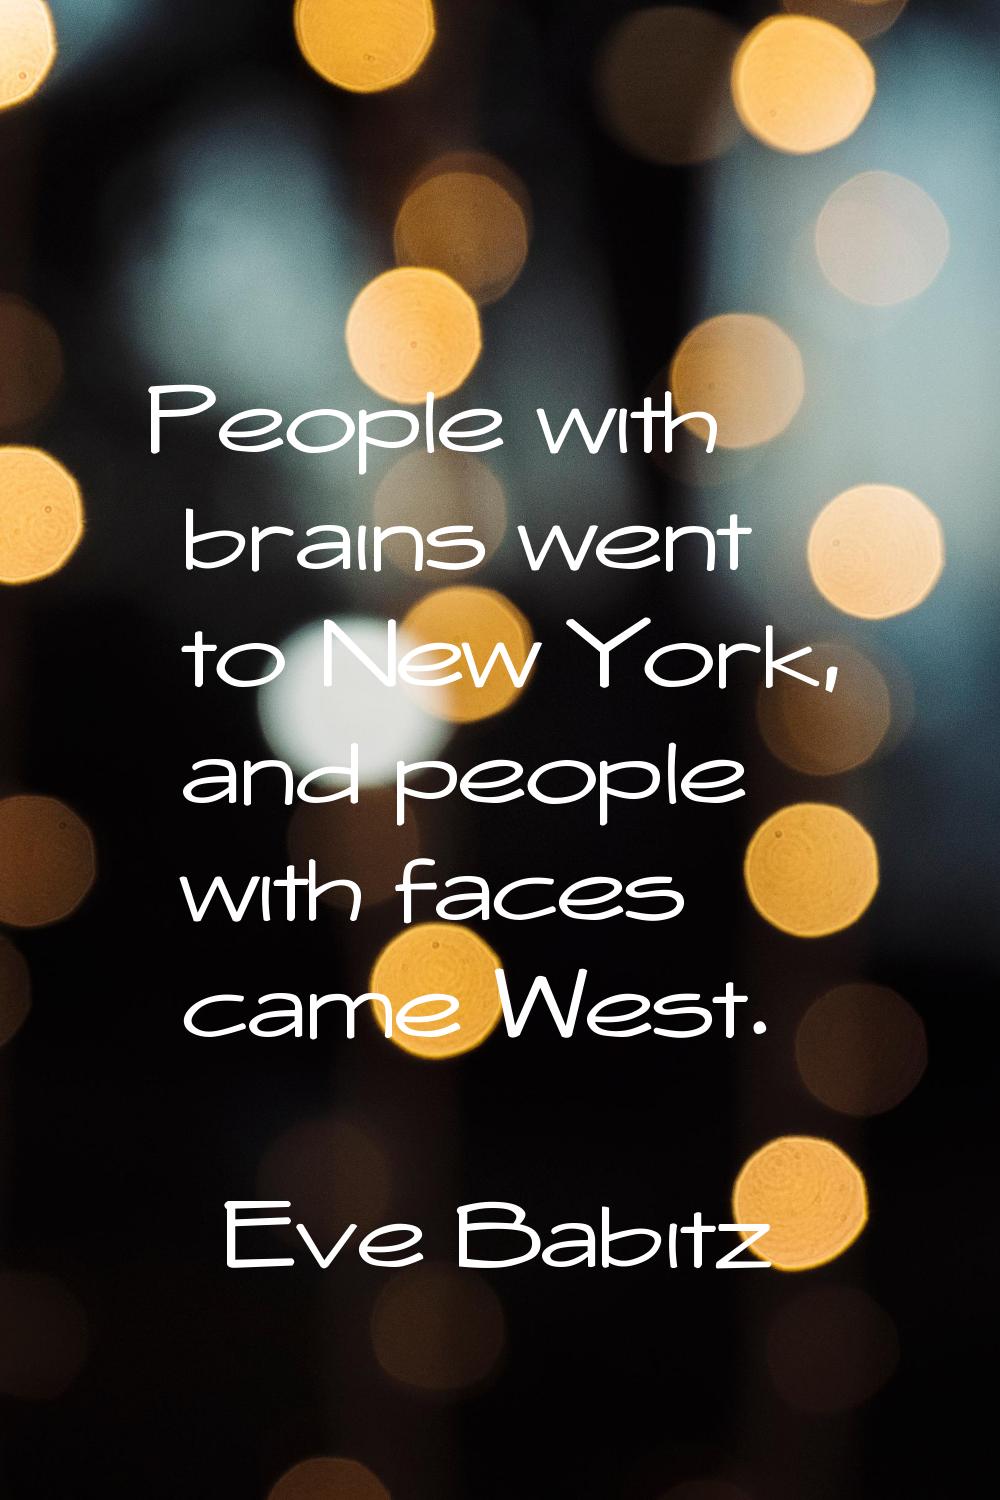 People with brains went to New York, and people with faces came West.